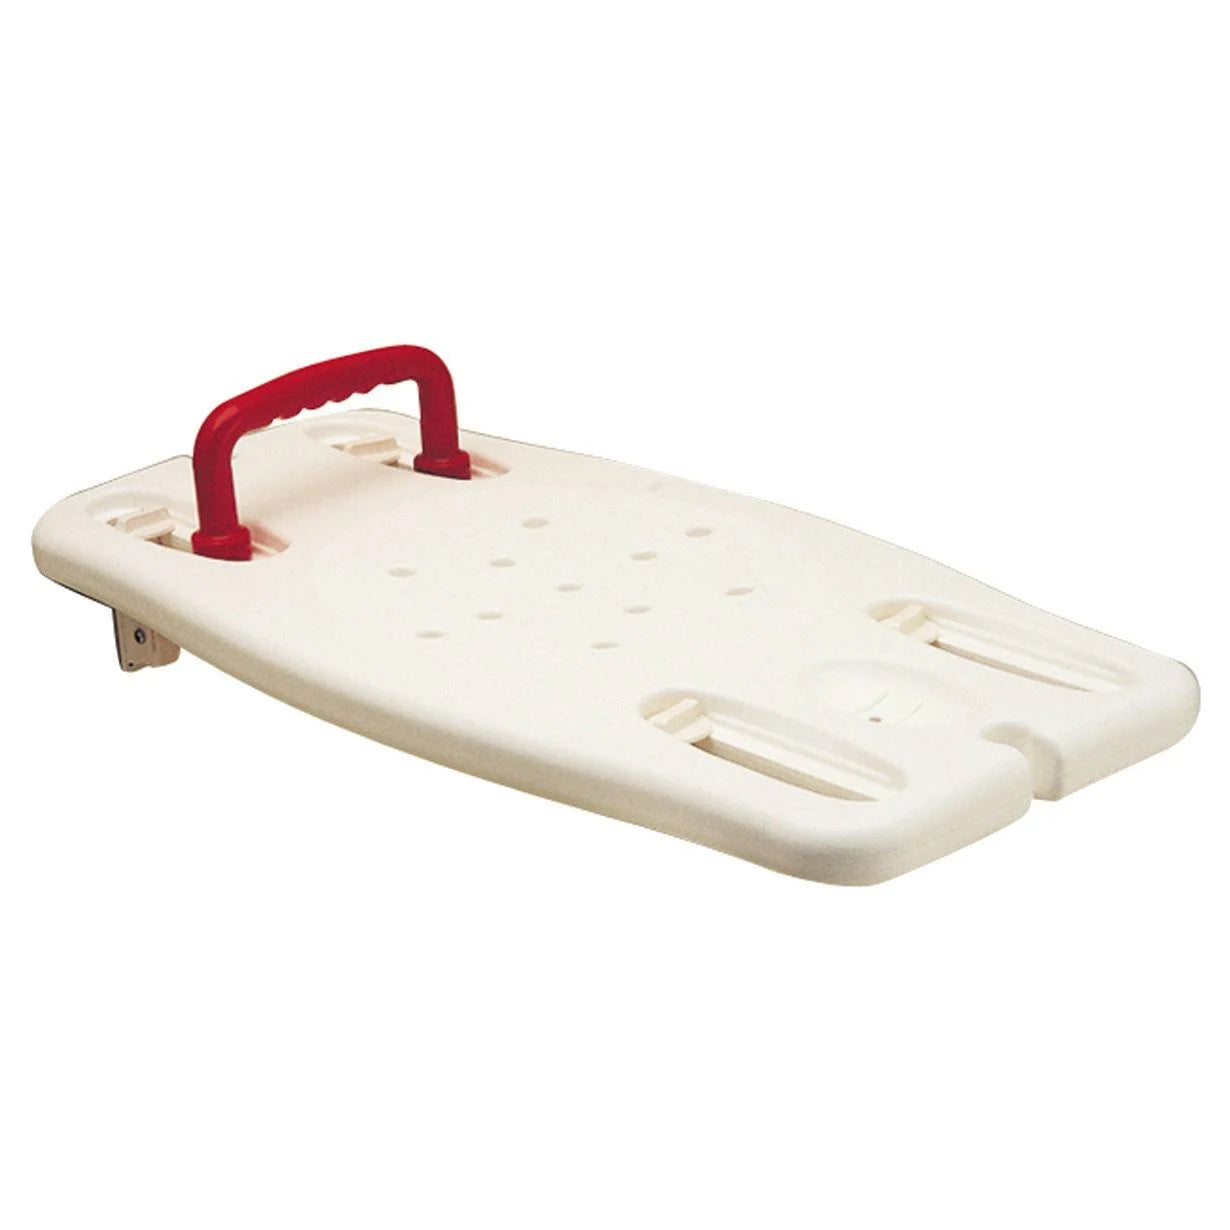 Portable Shower Bench